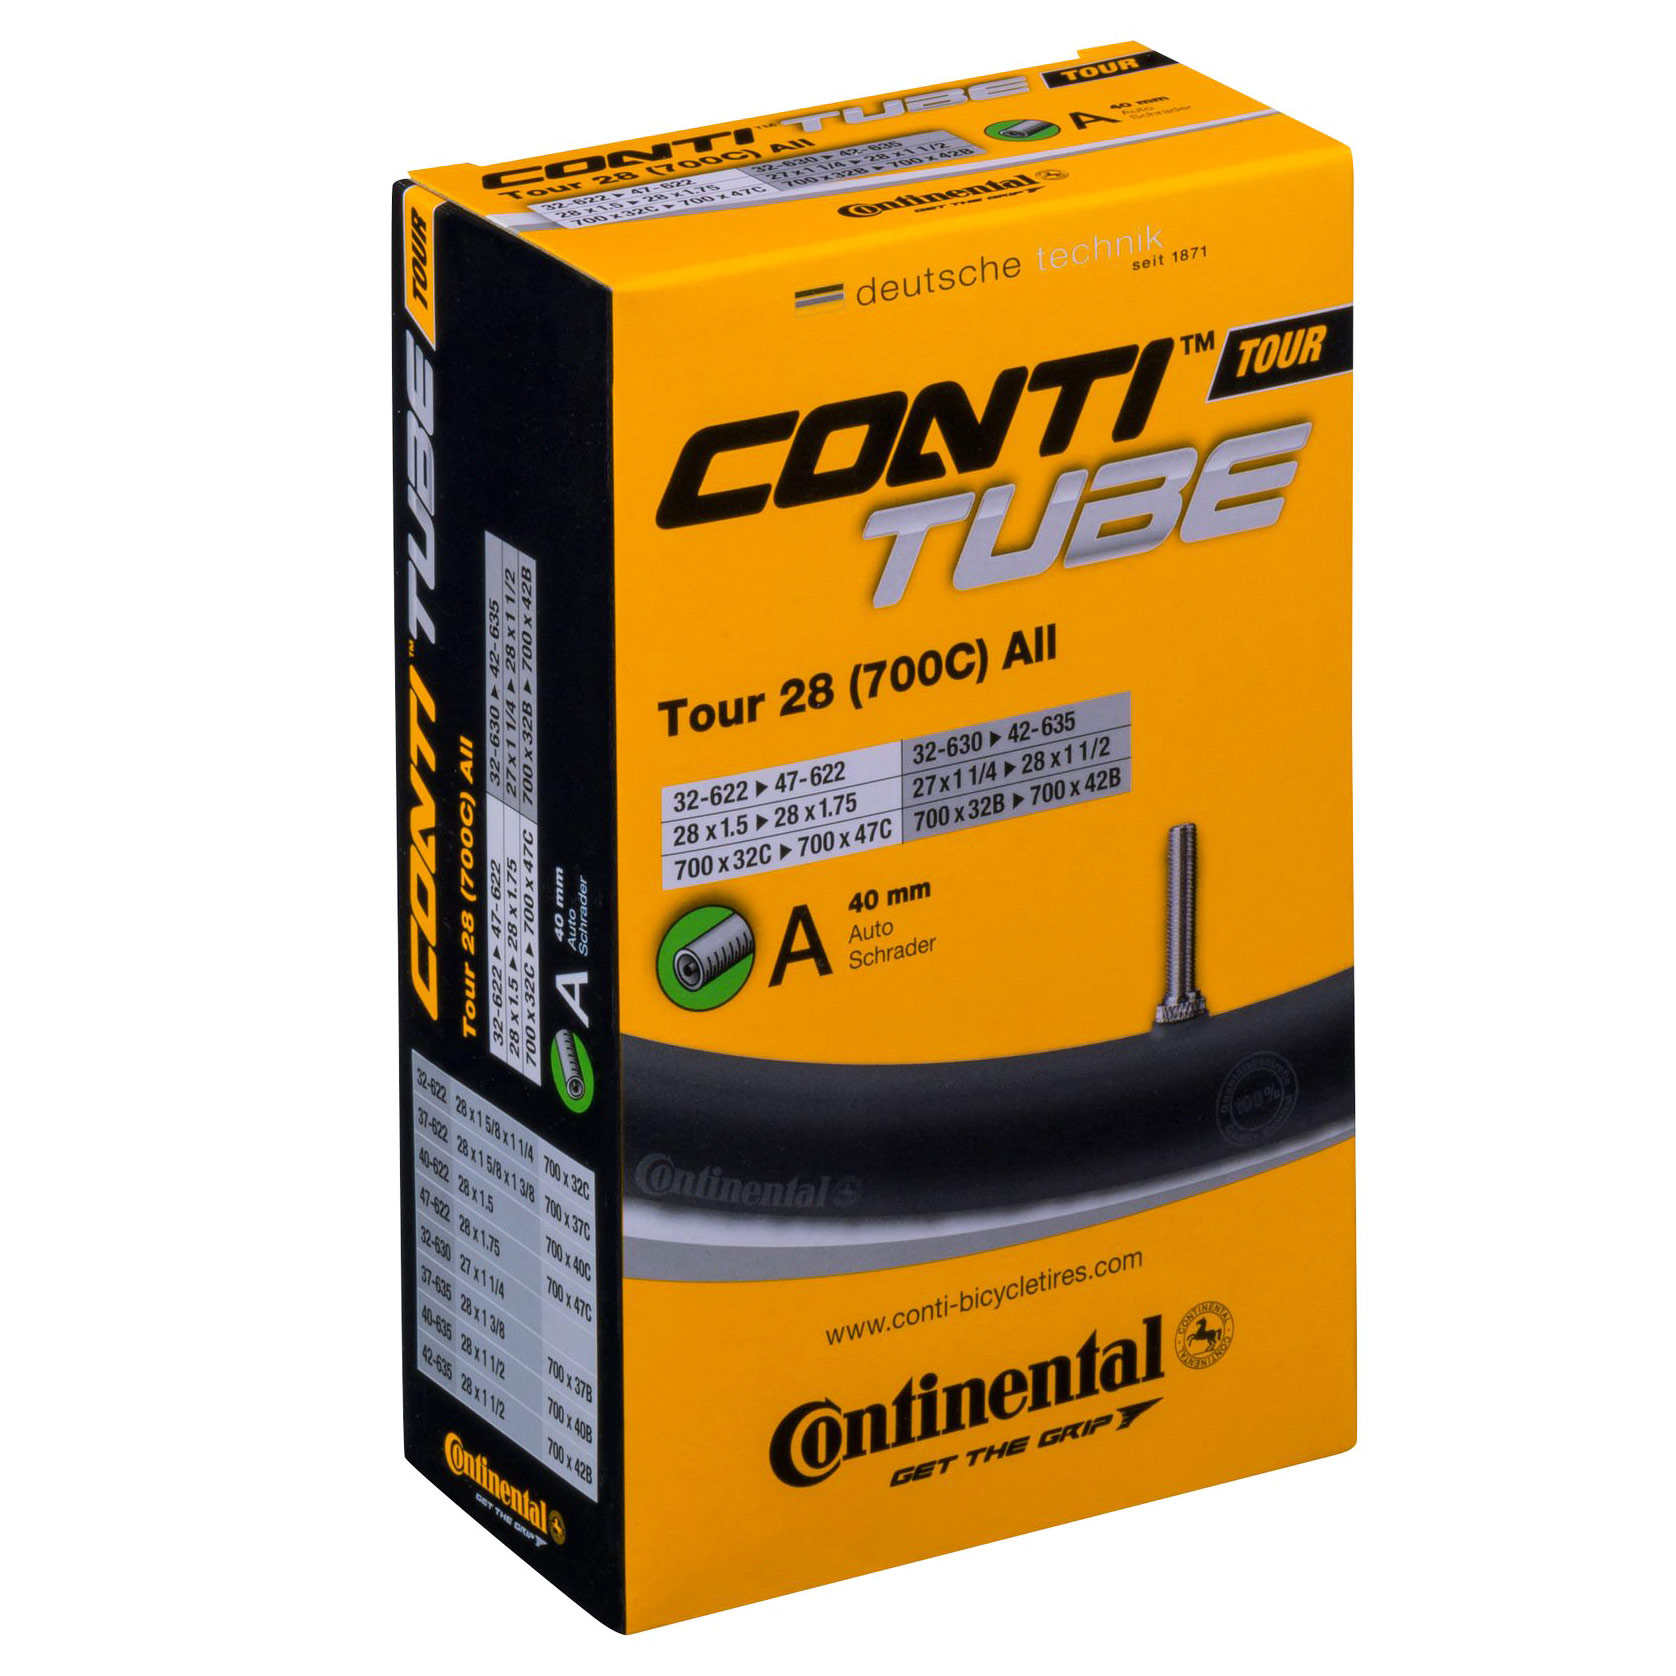 Productfoto van Continental Tour 28 All Tube